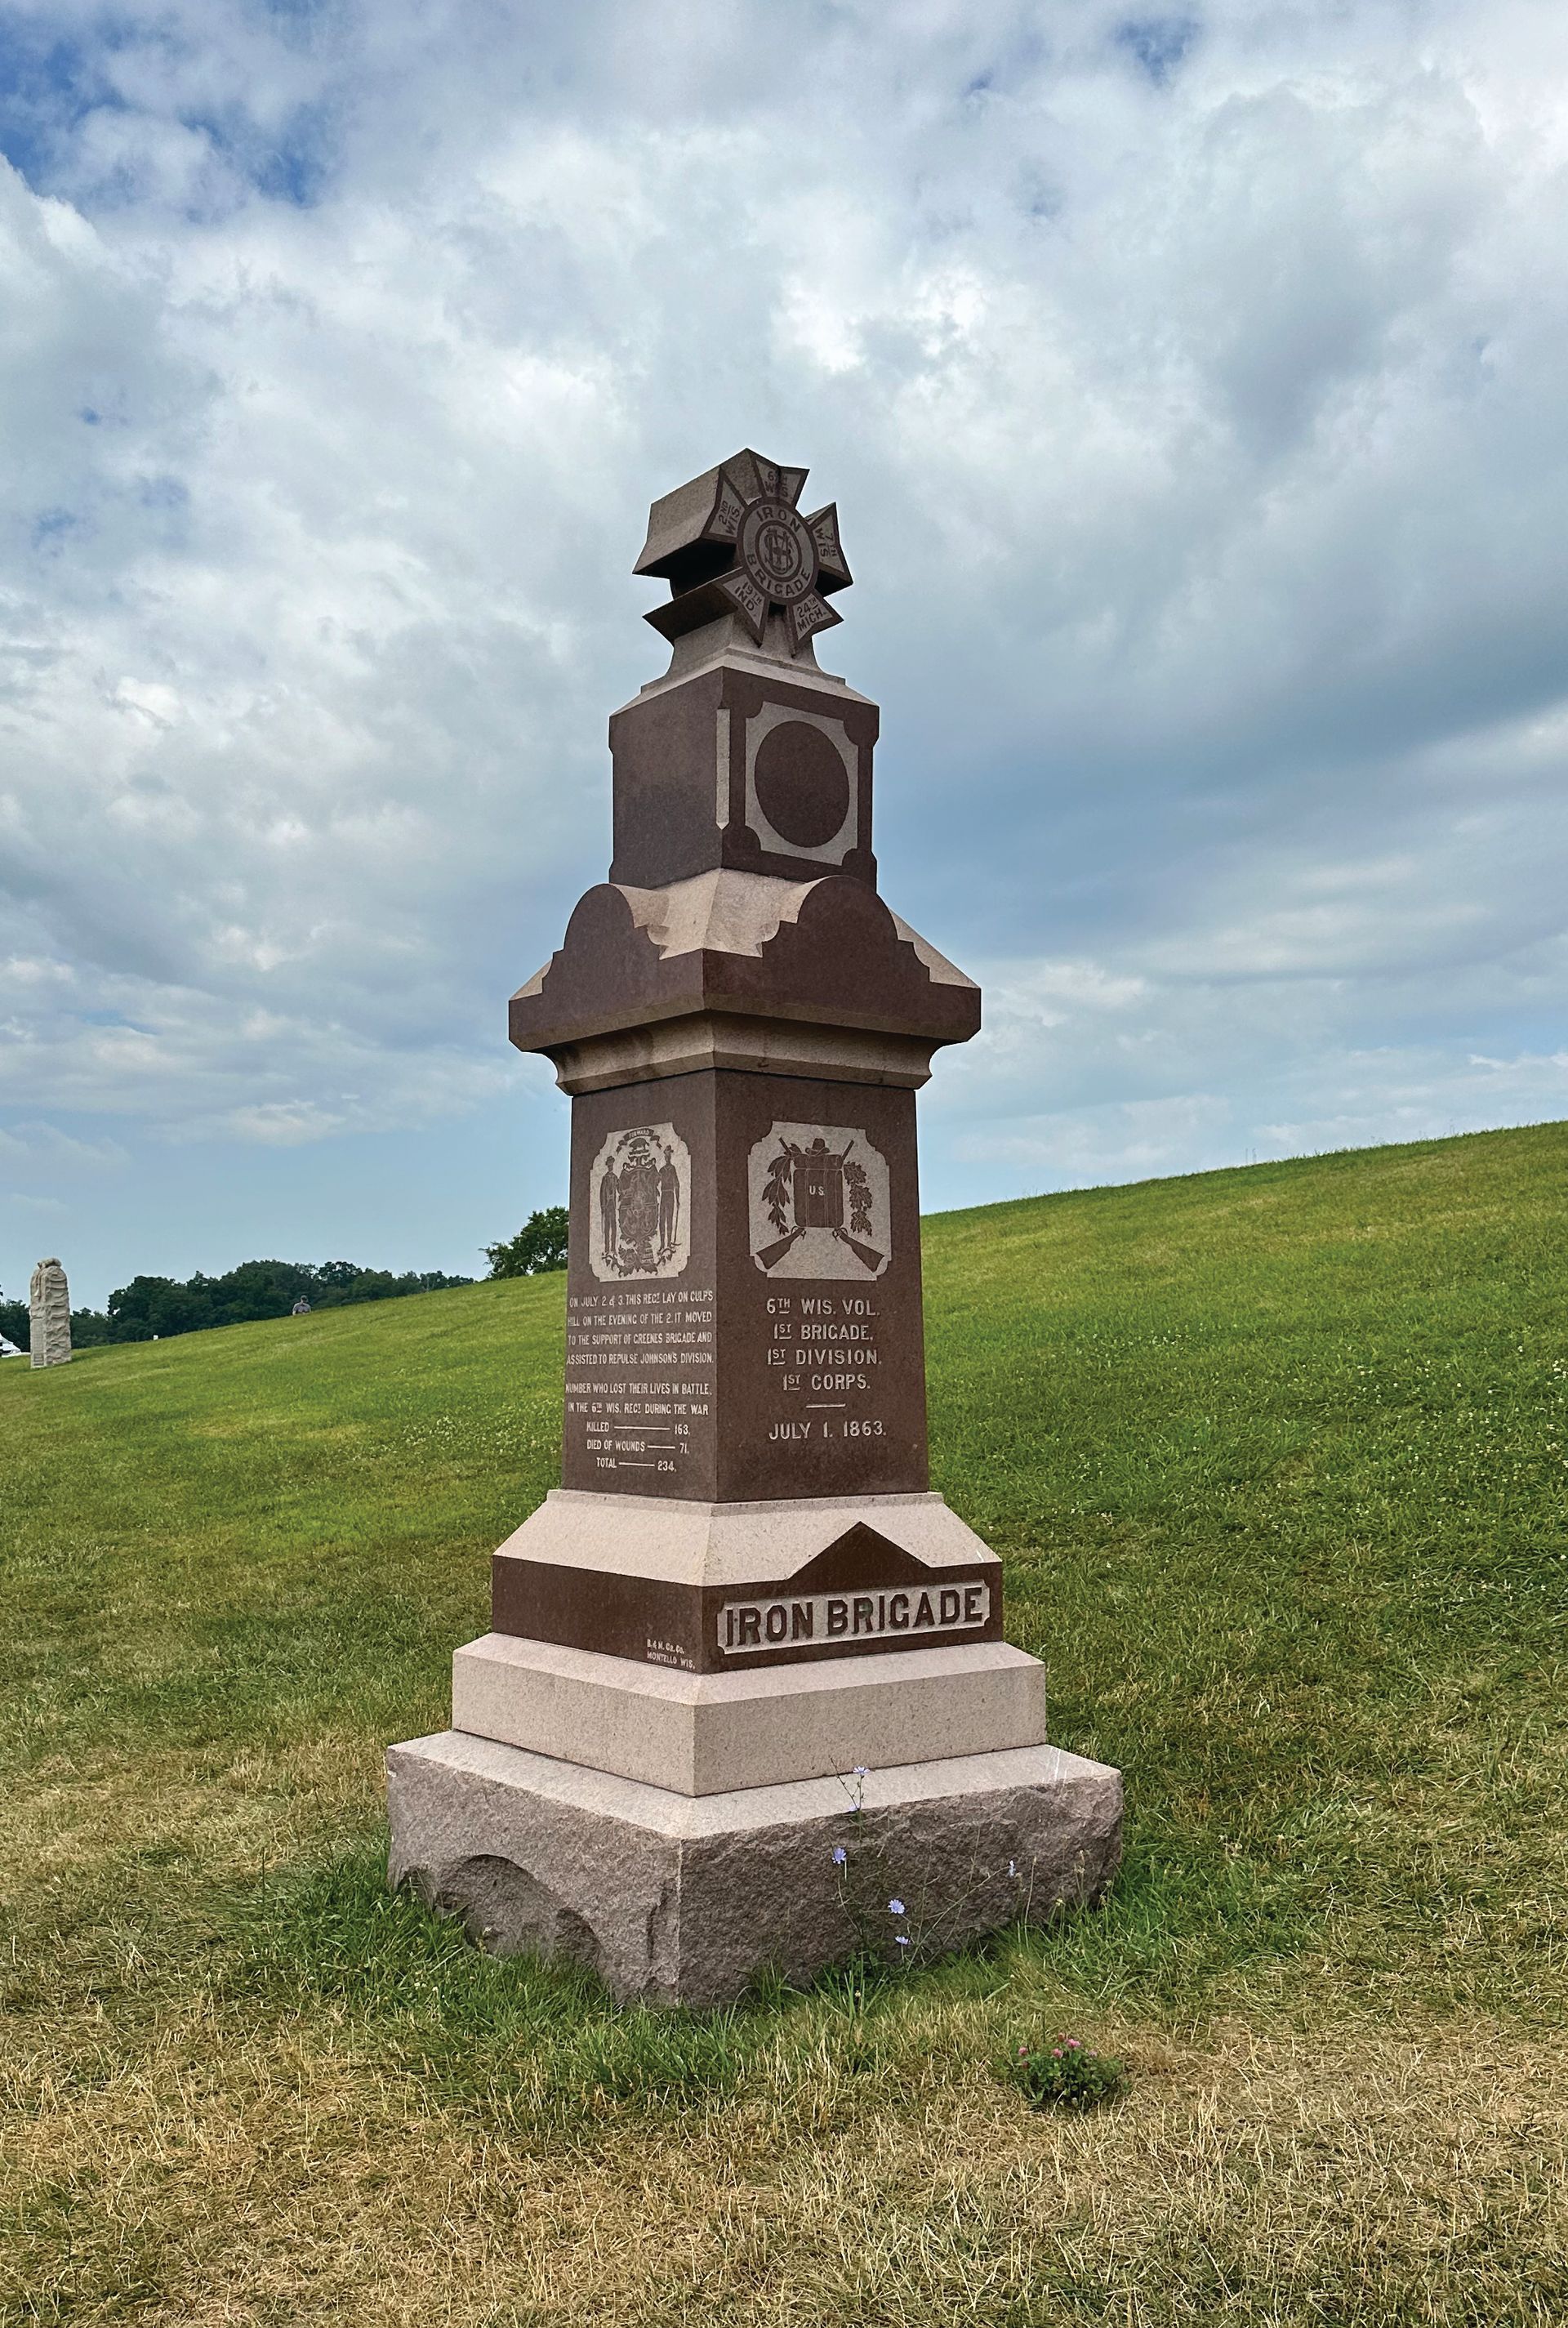 The 6th Wisconsin Memorial